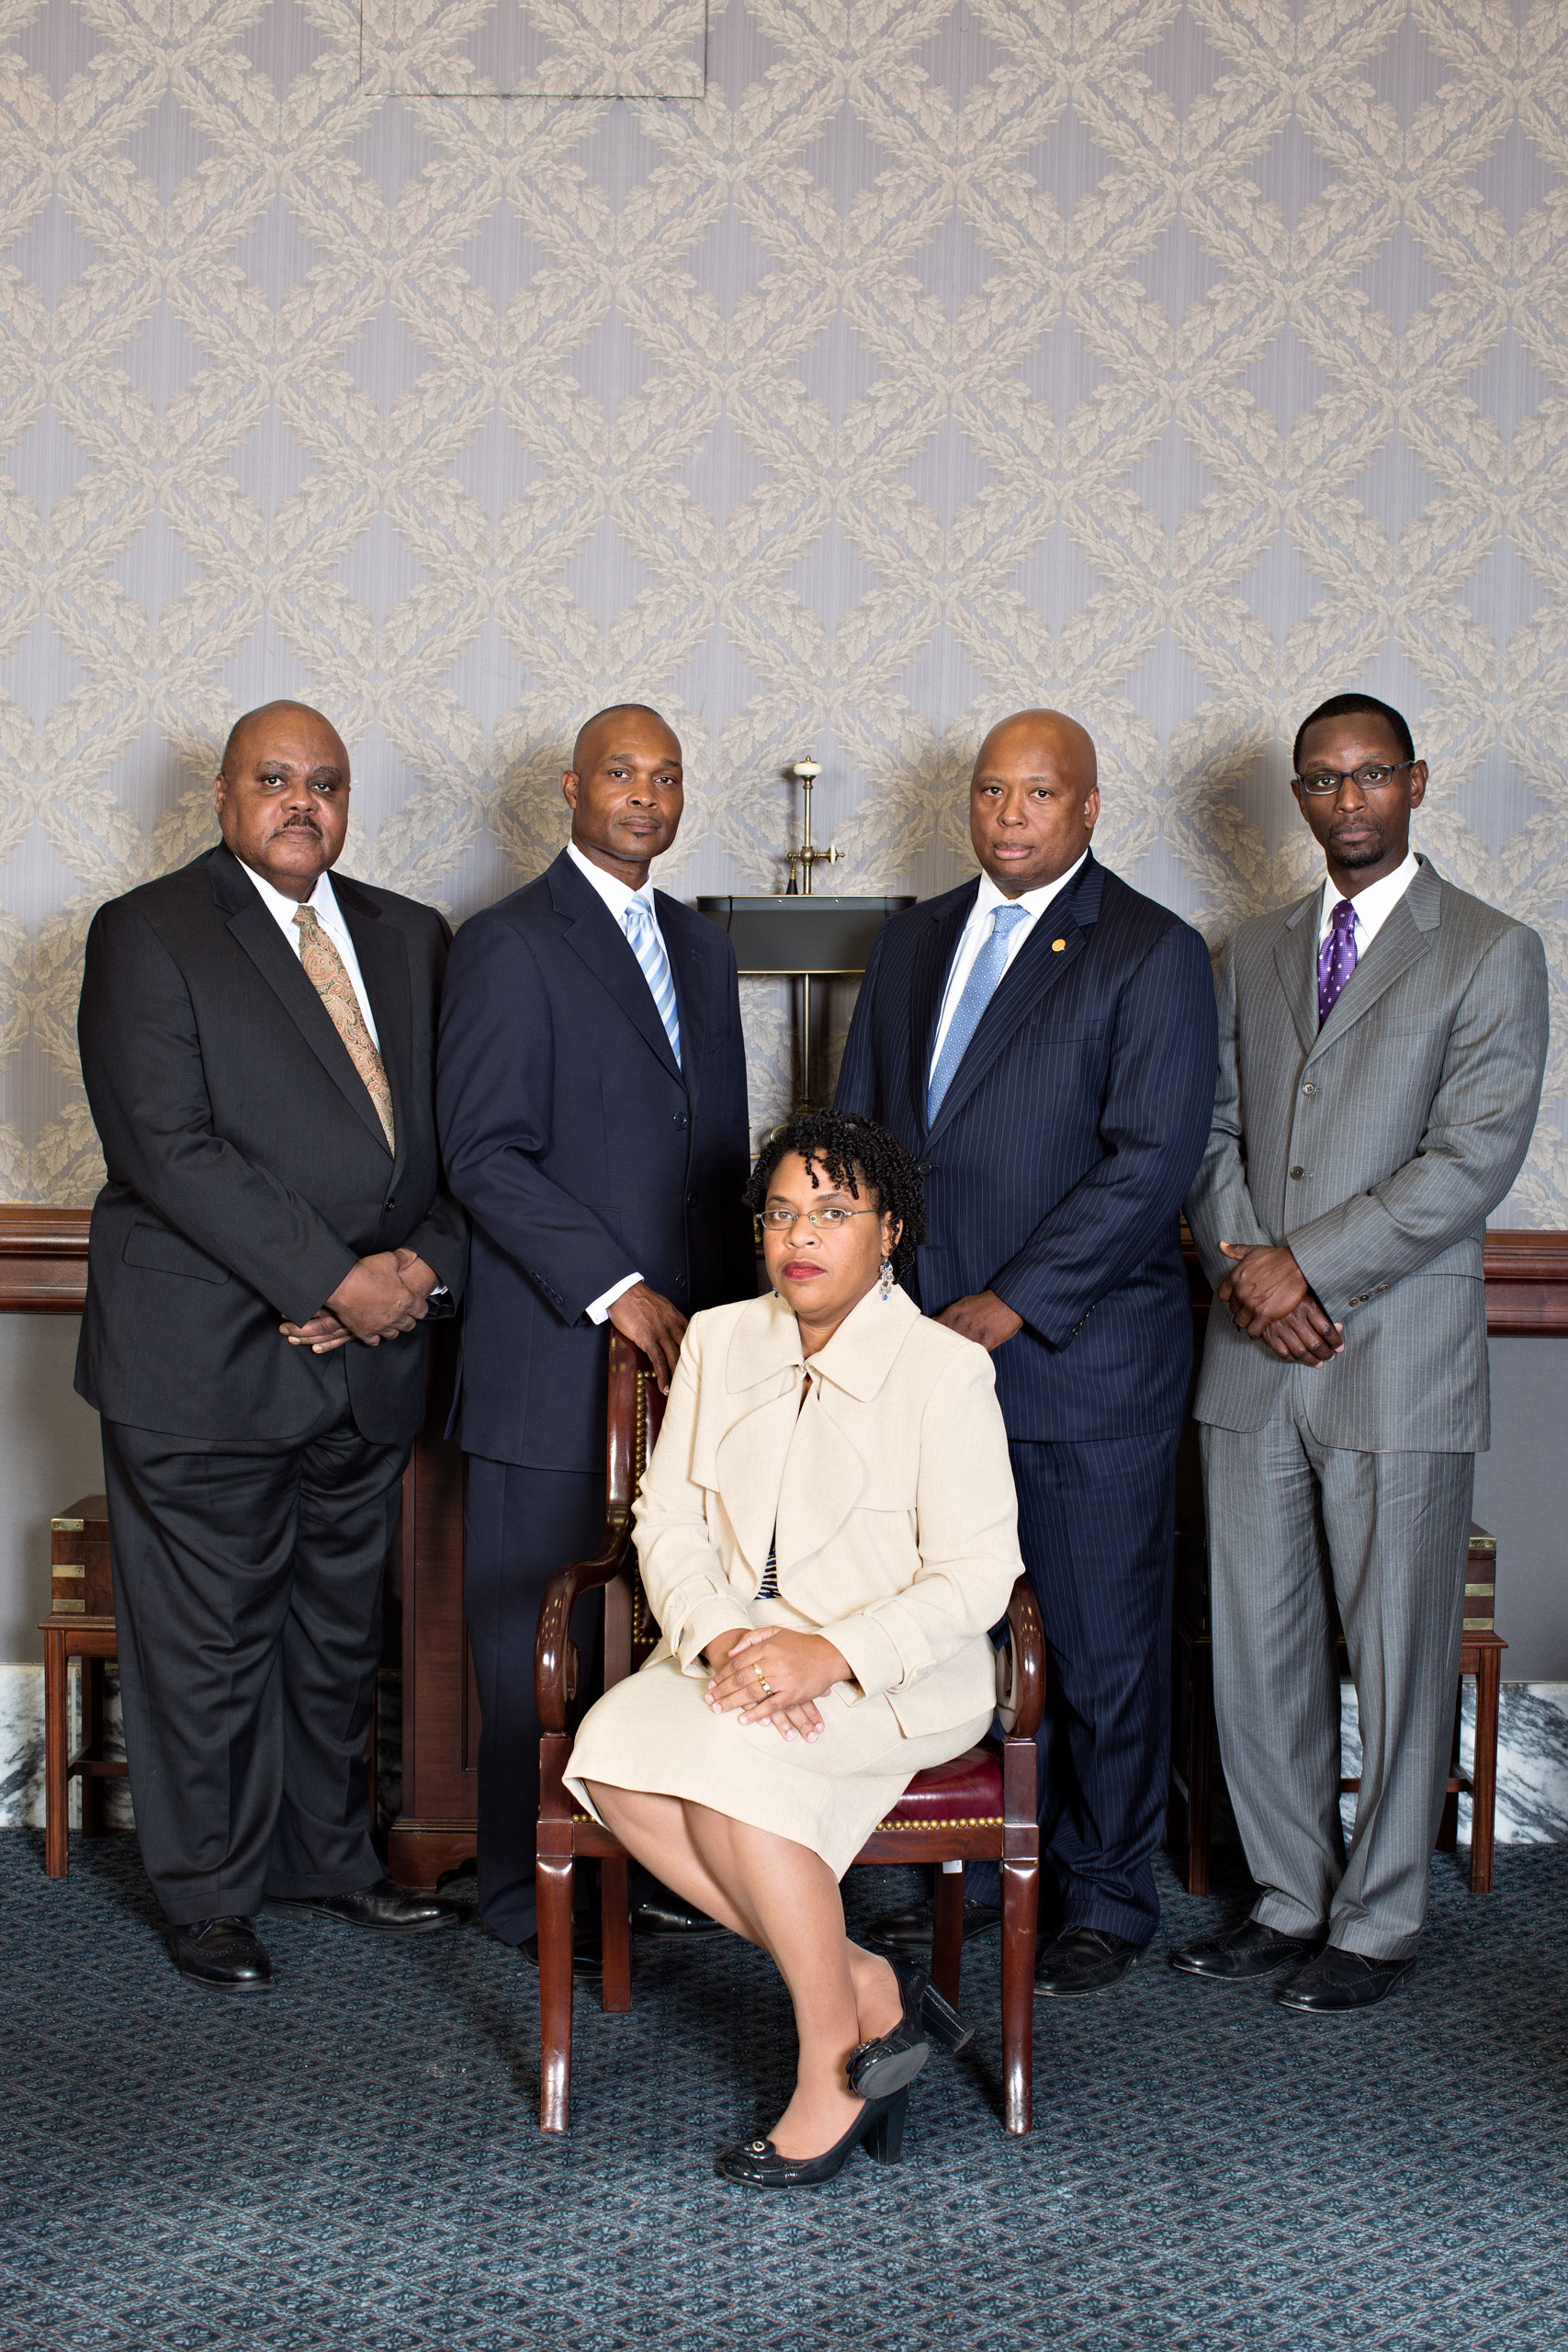 Jennifer Pinckney with (from left) Representative Joe Neal, the Rev. Chris Vaughn, the Rev. Kylon Middleton and Senator Gerald Malloy
                              
                              The Rev. Clementa Pinckney’s four best friends, photographed with his widow at the South Carolina State House, have guarded the family in his absence